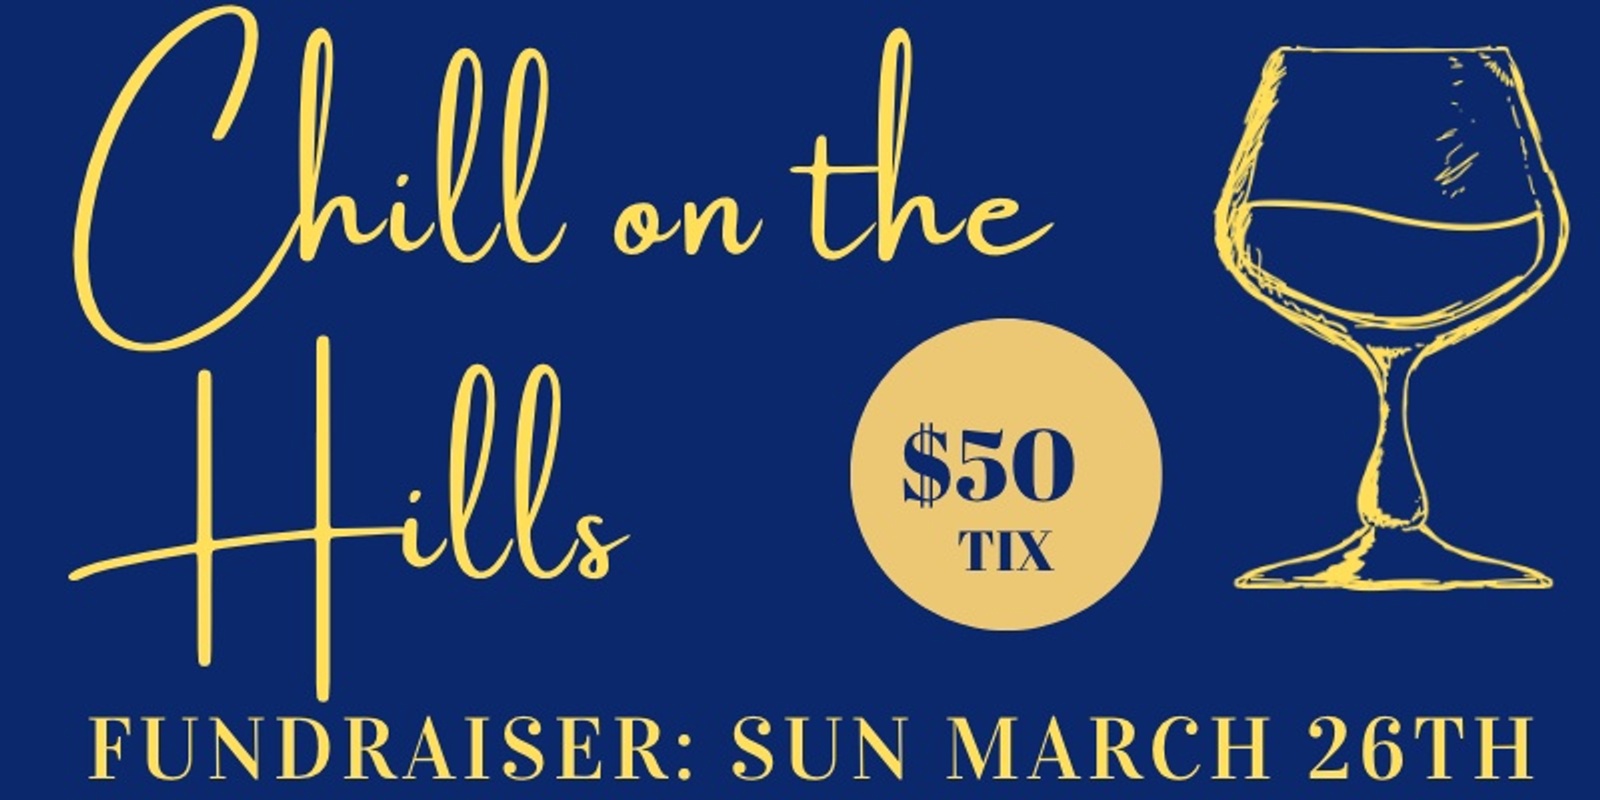 Chill on the Hills: Wine Tasting Fundraiser for Monica, Star of nowra 2023